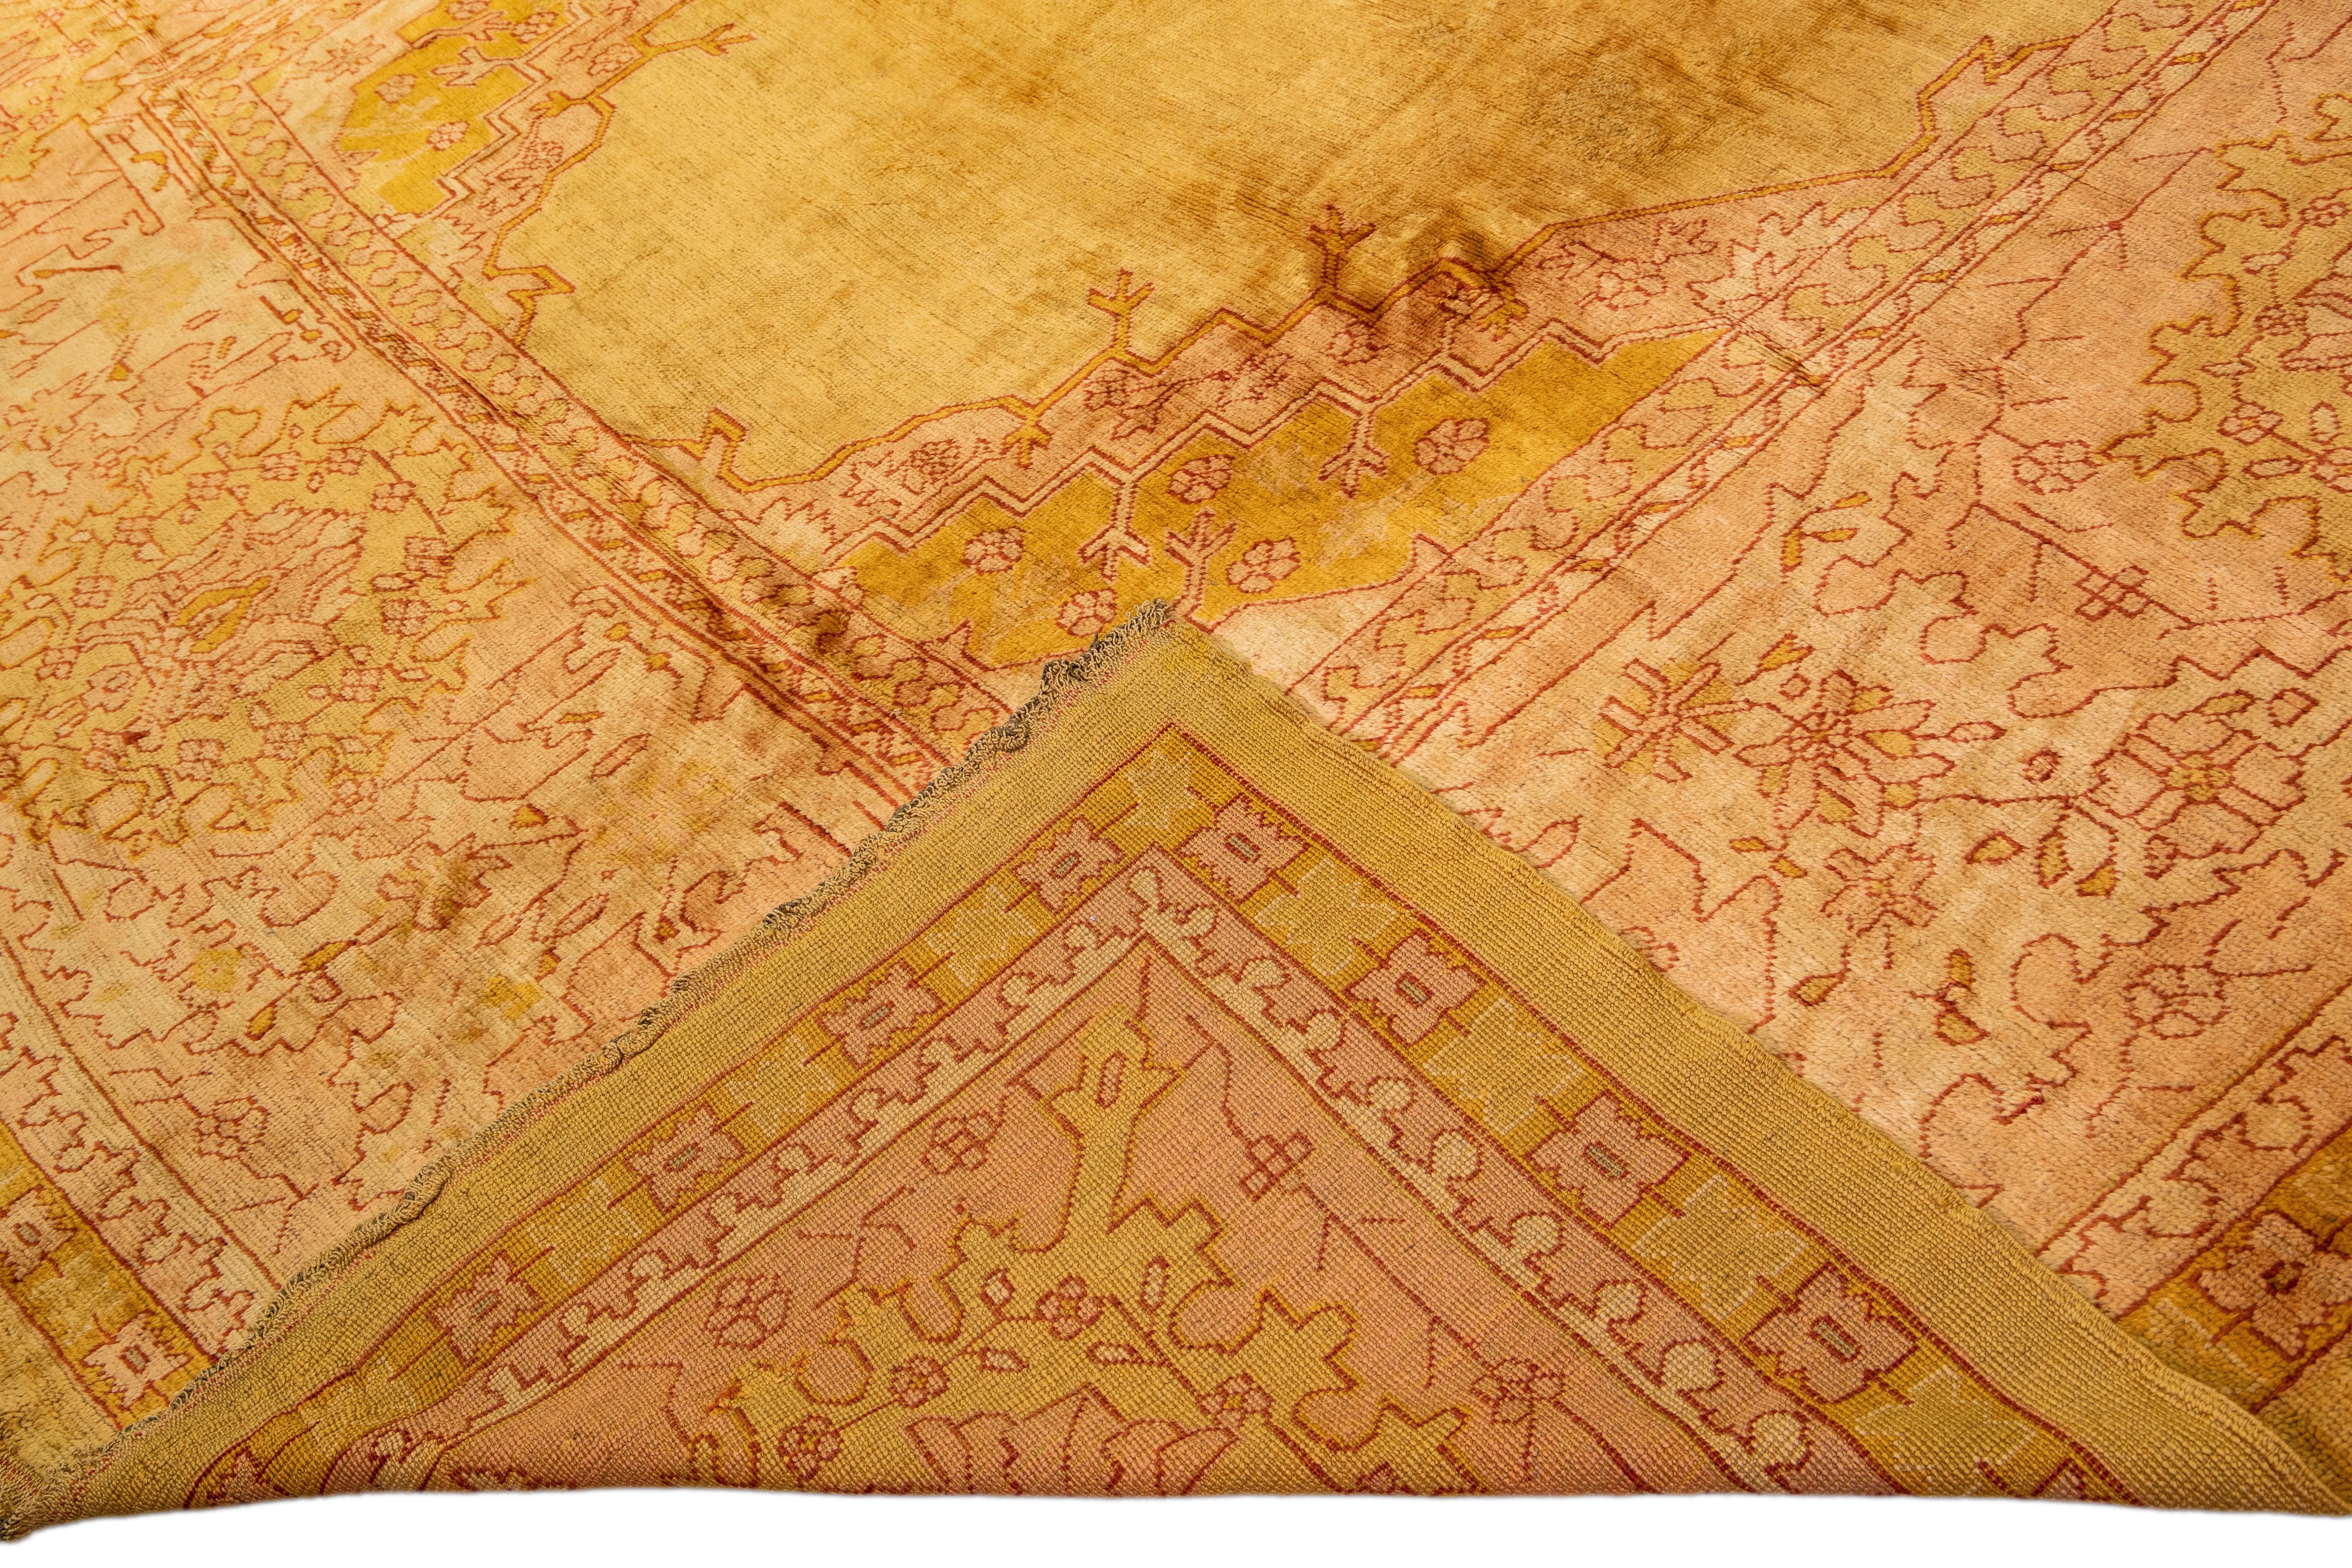 Beautiful Vintage Turkish hand-knotted wool rug with a goldenrod field. This rug has a peach floral-designed frame a gorgeous solid field.

This rug measures: 12' x 21'.